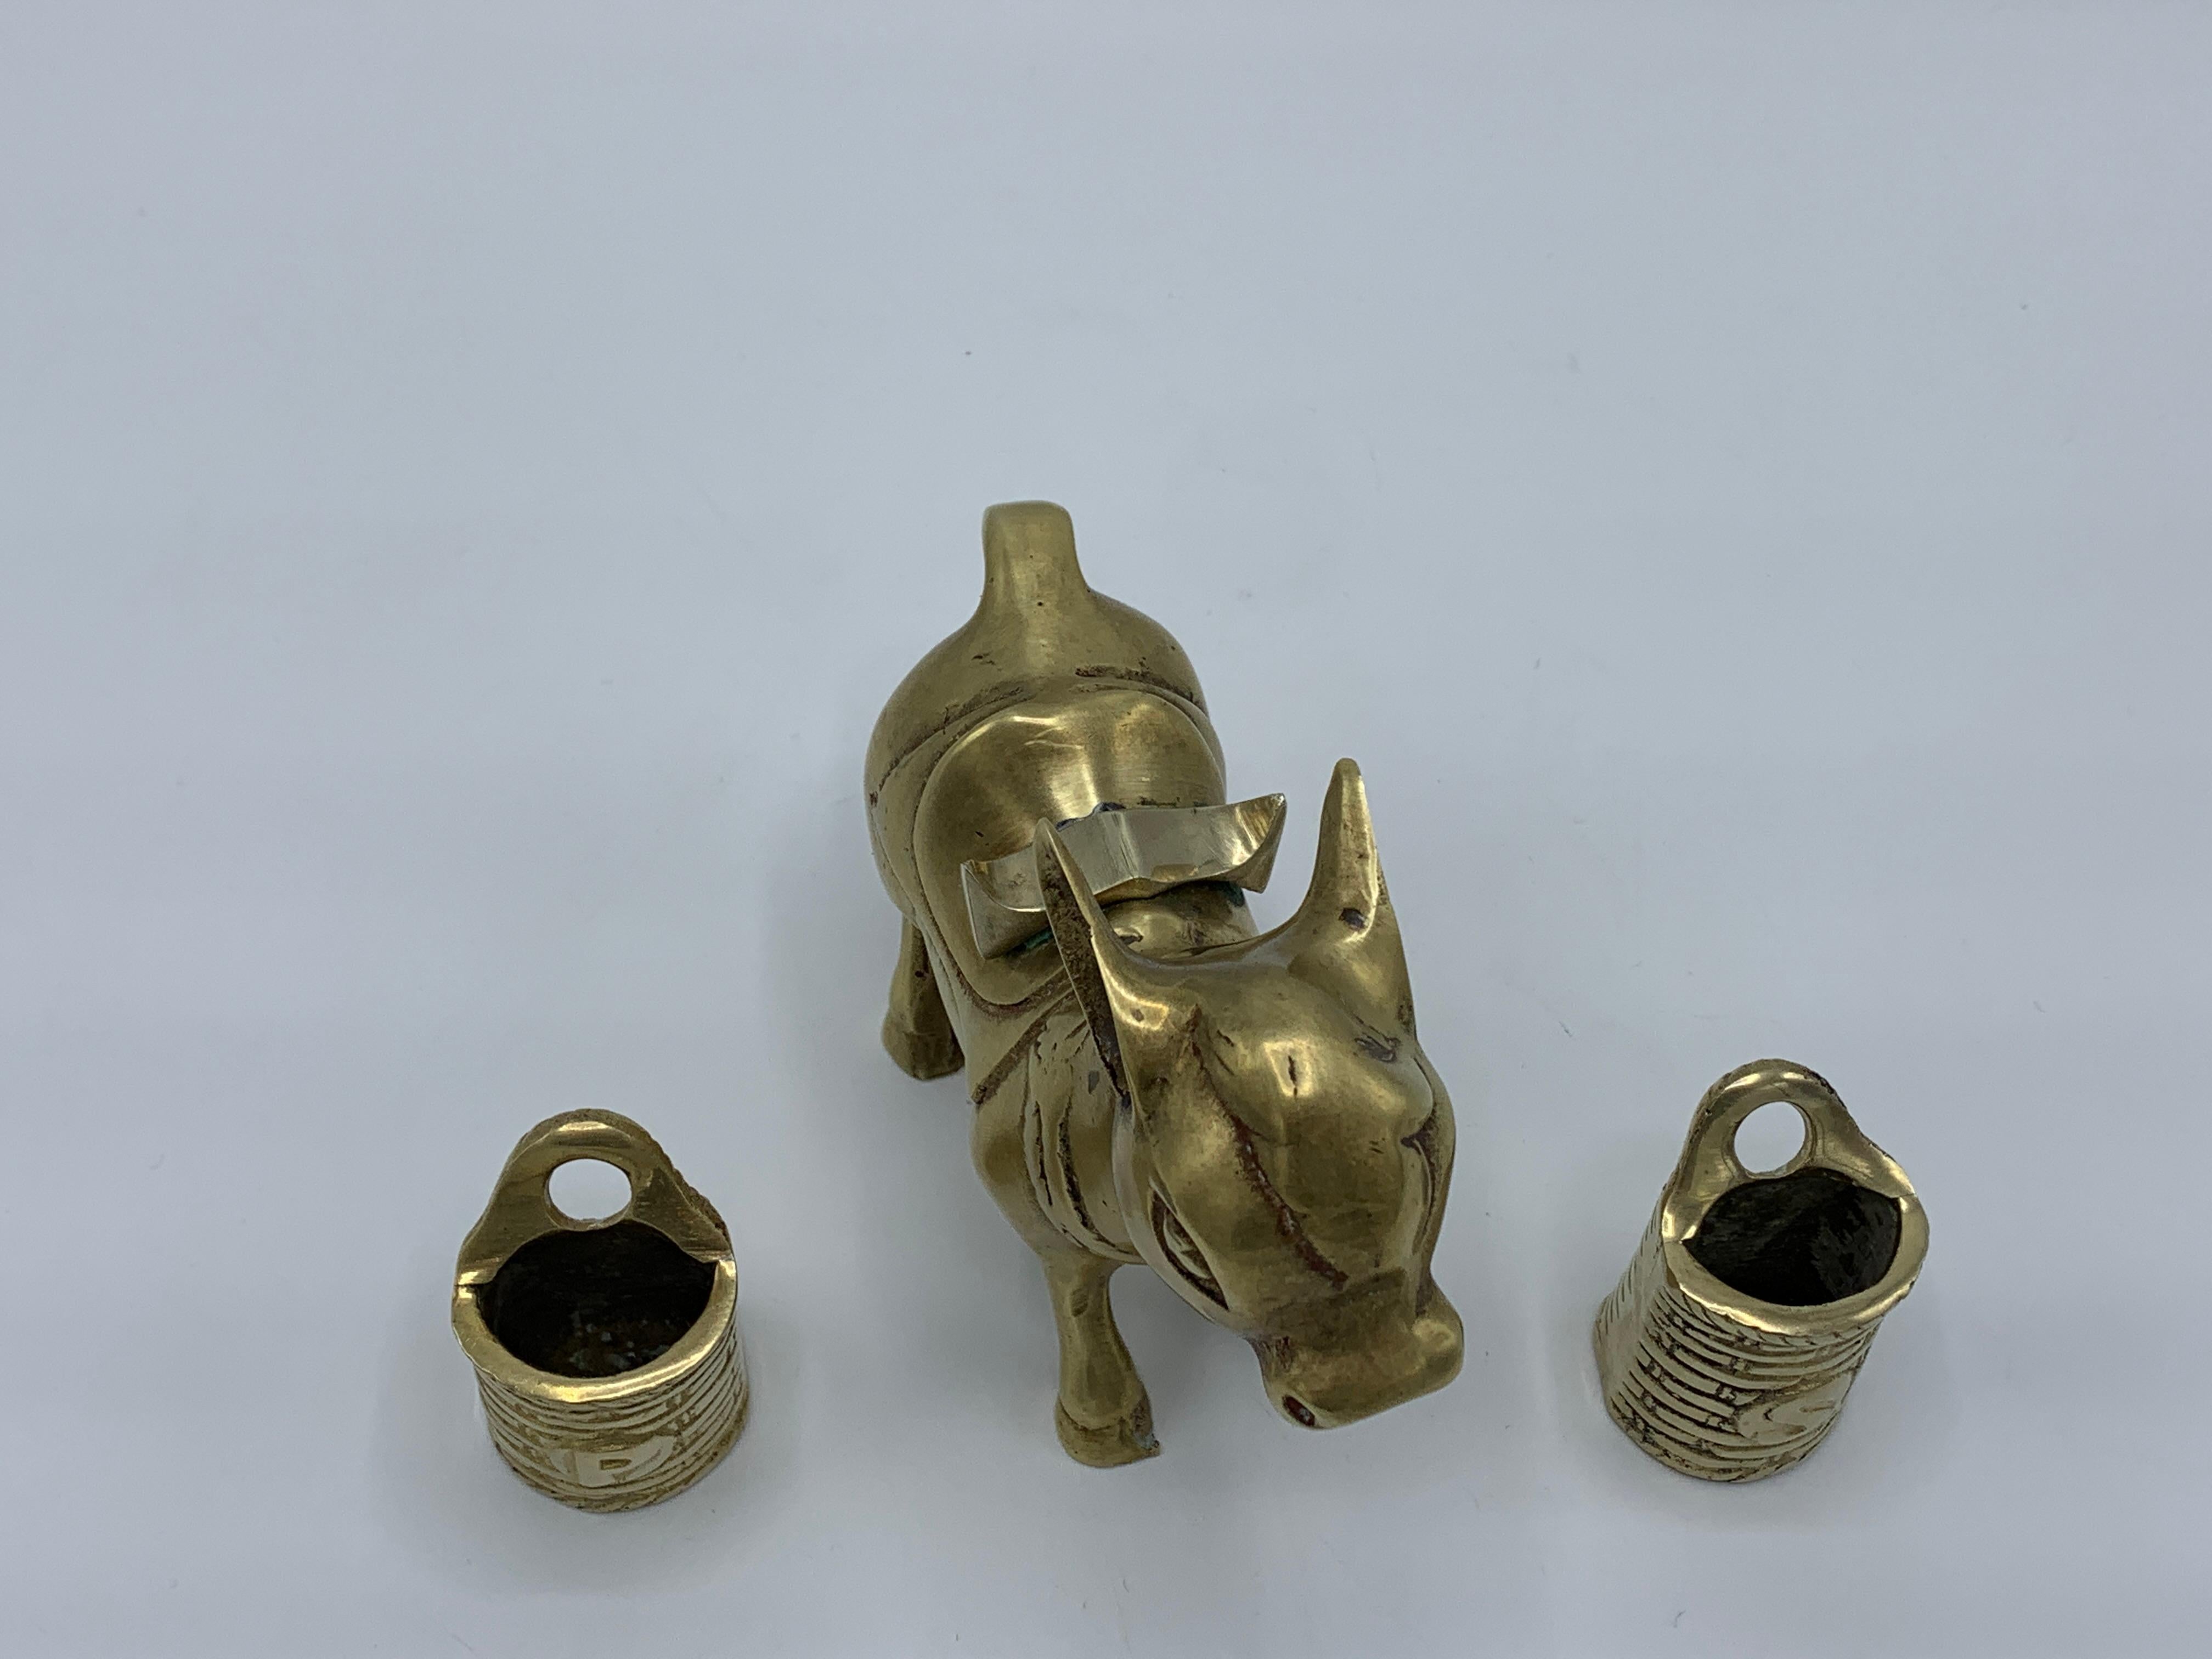 1960s Brass Mule with Saddle Bag Salt and Pepper Shaker Set 3